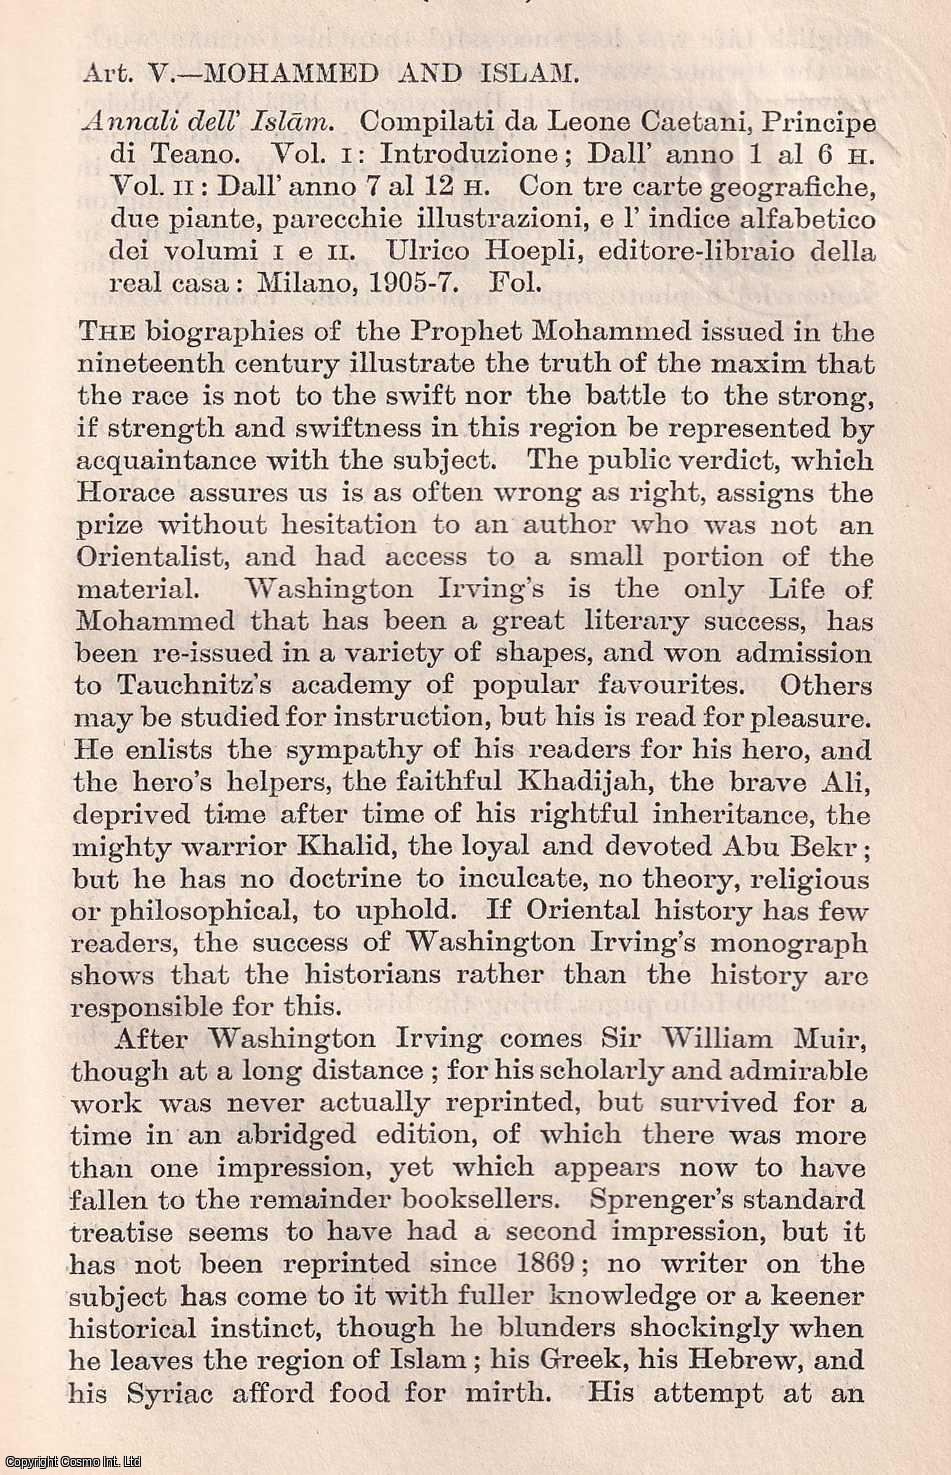 --- - Mohammed and Islam. A rare original article from the Quarterly Review, 1908.